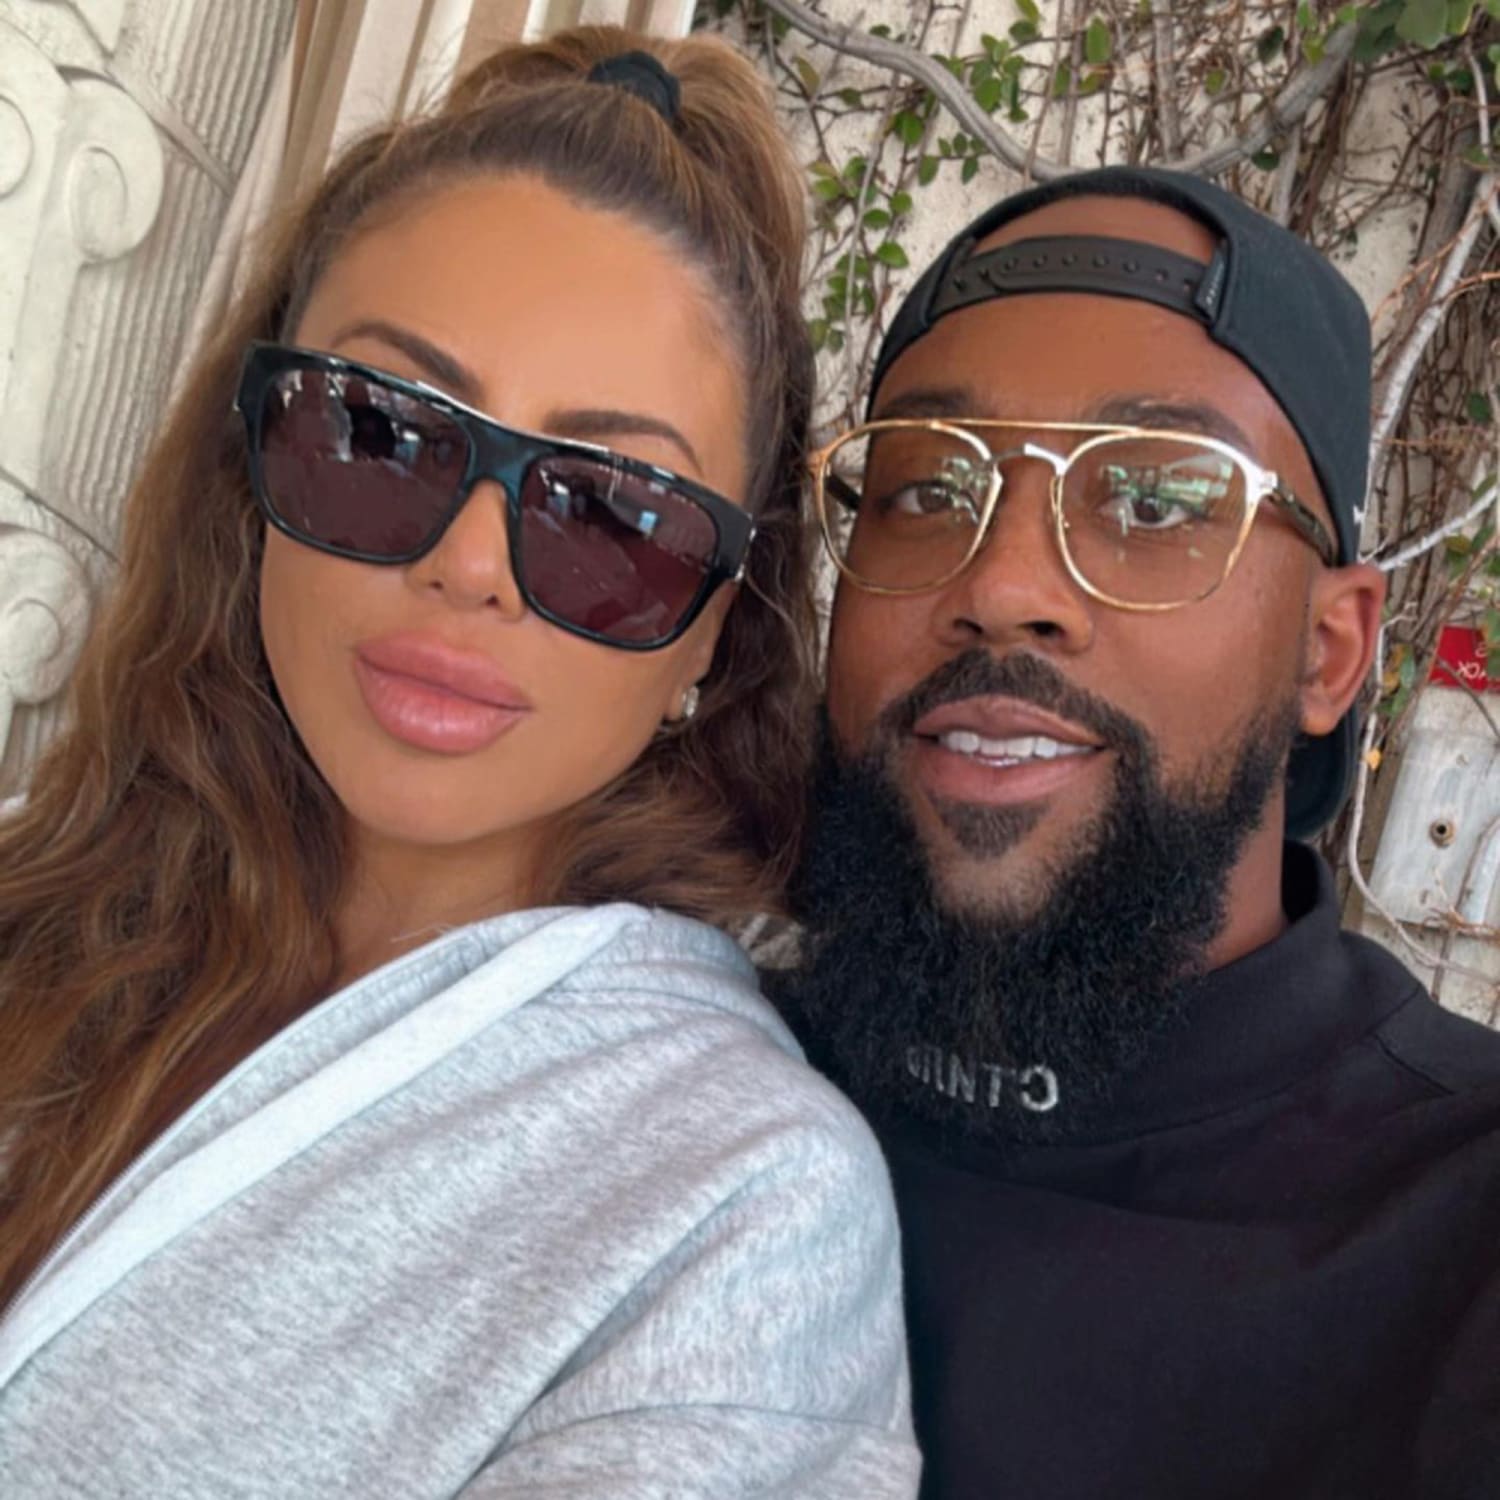 What's Really Going on With Larsa Pippen & Michael Jordan's Son Marcus